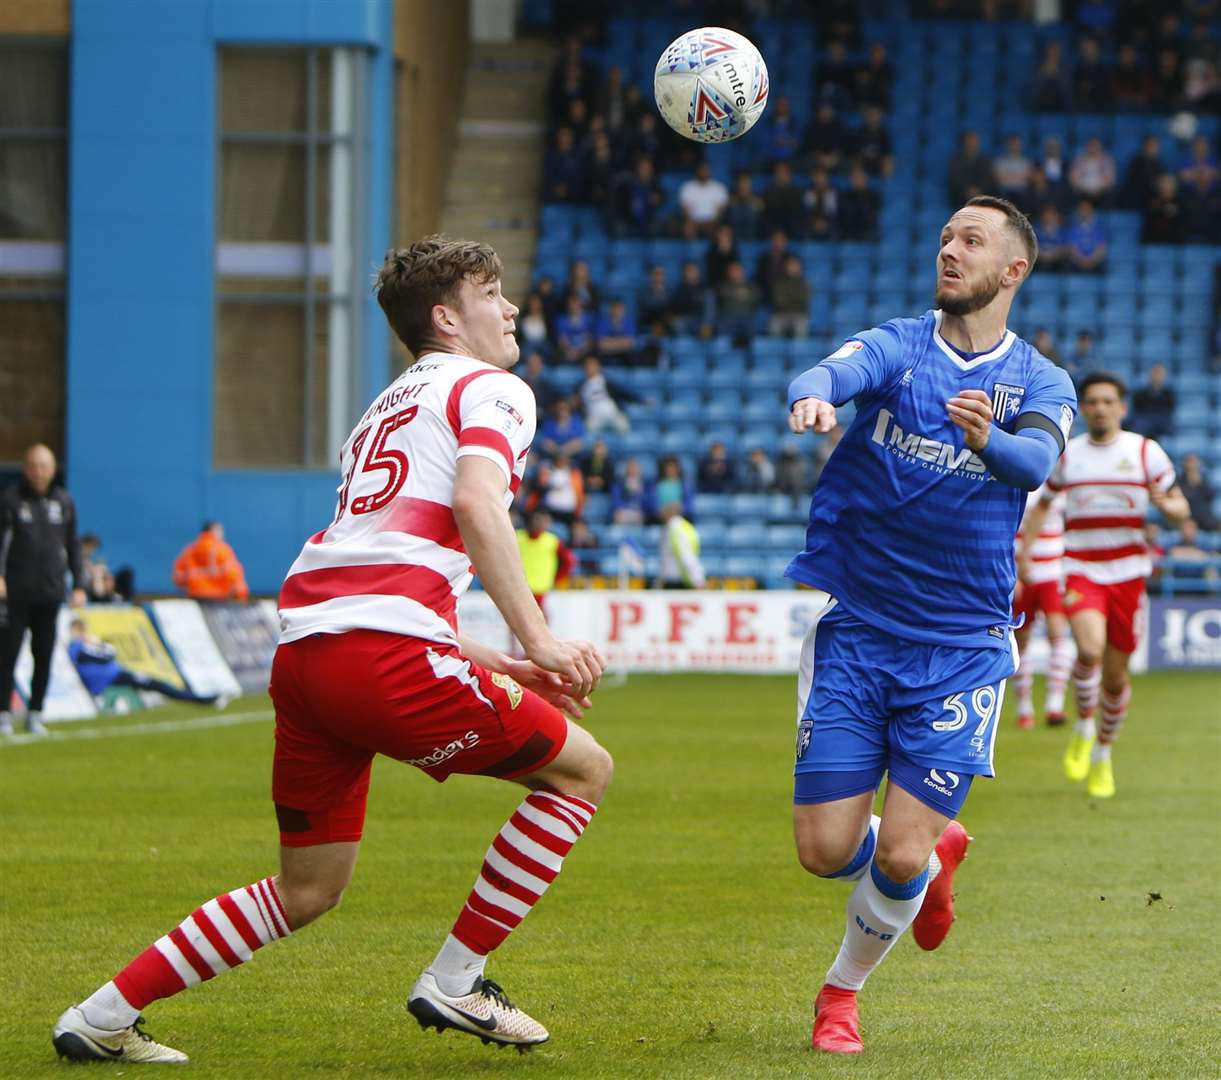 Forward Rhys Murphy has his eye on the ball during his Gillingham debut on Saturday. Picture: Andy Jones